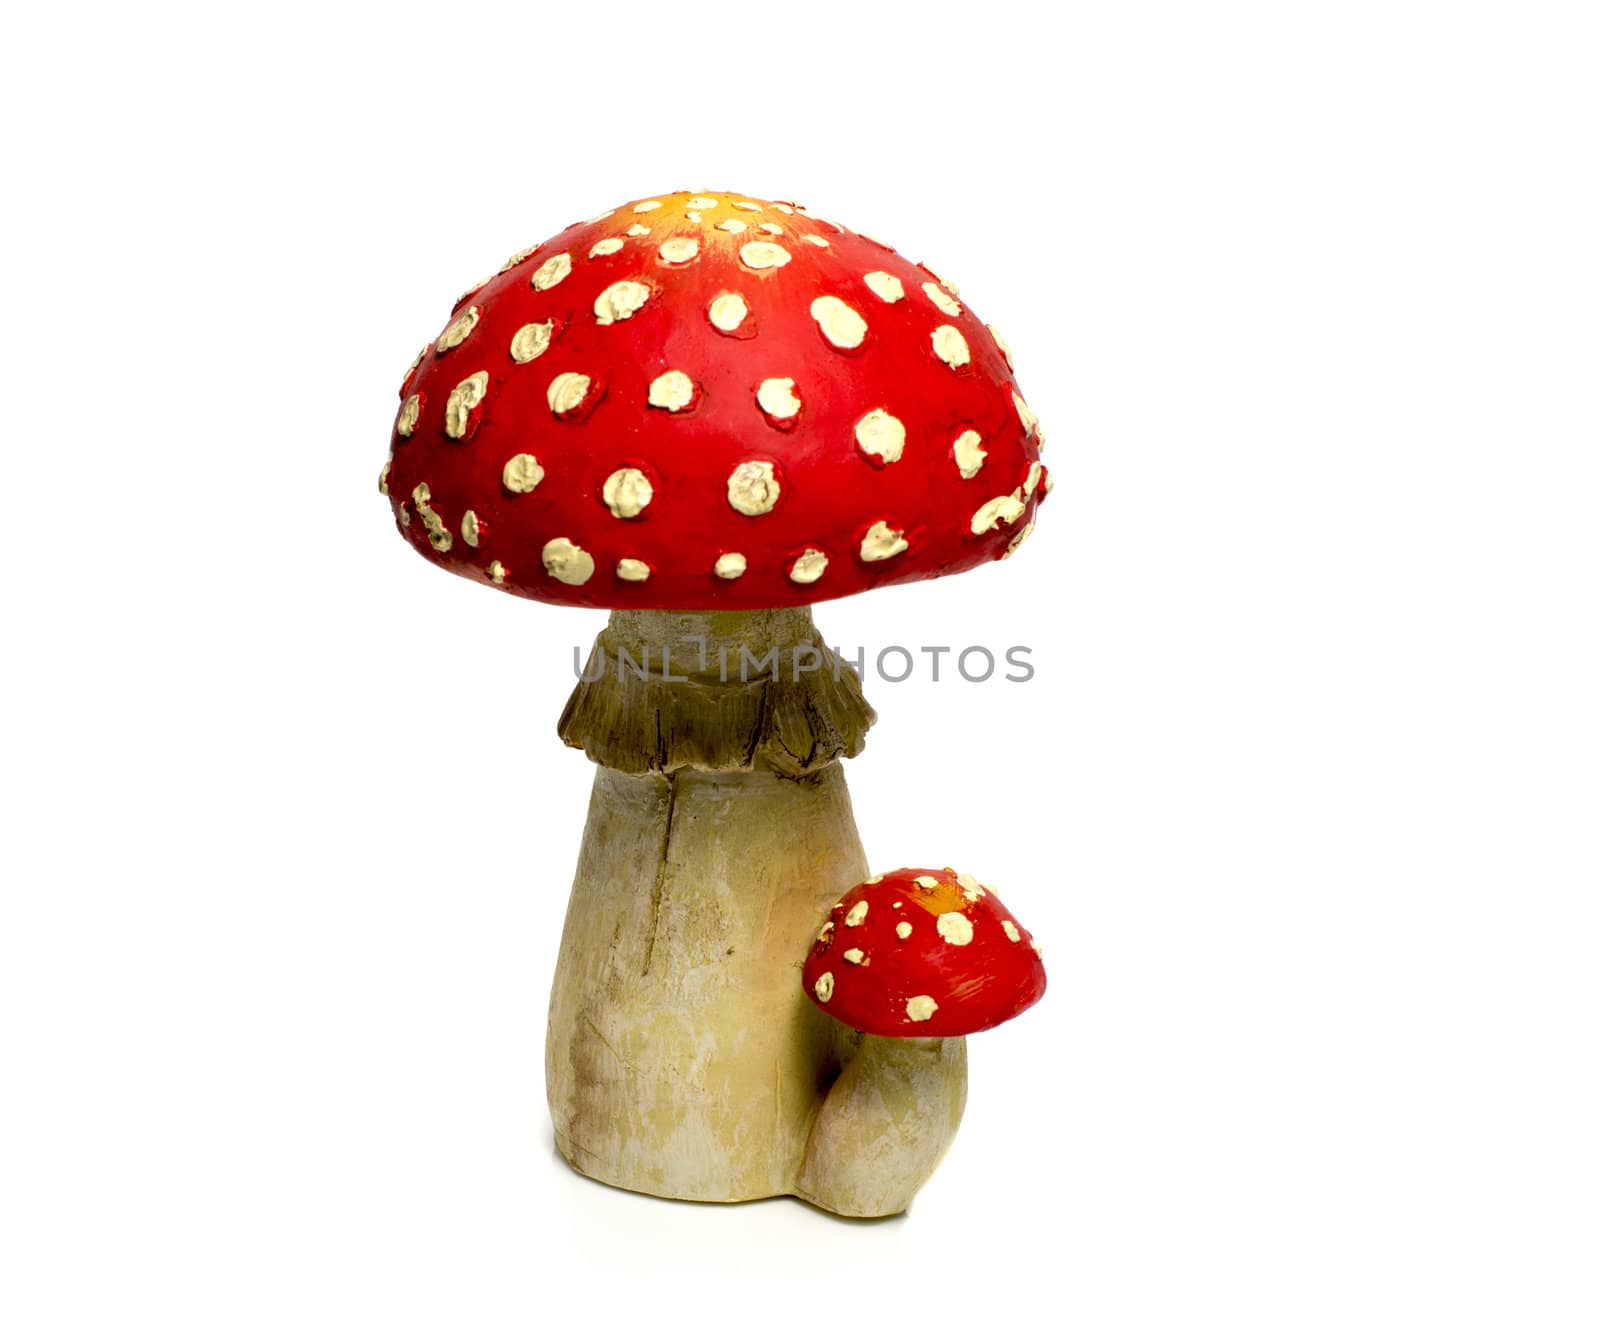 mushroom red and white by compuinfoto